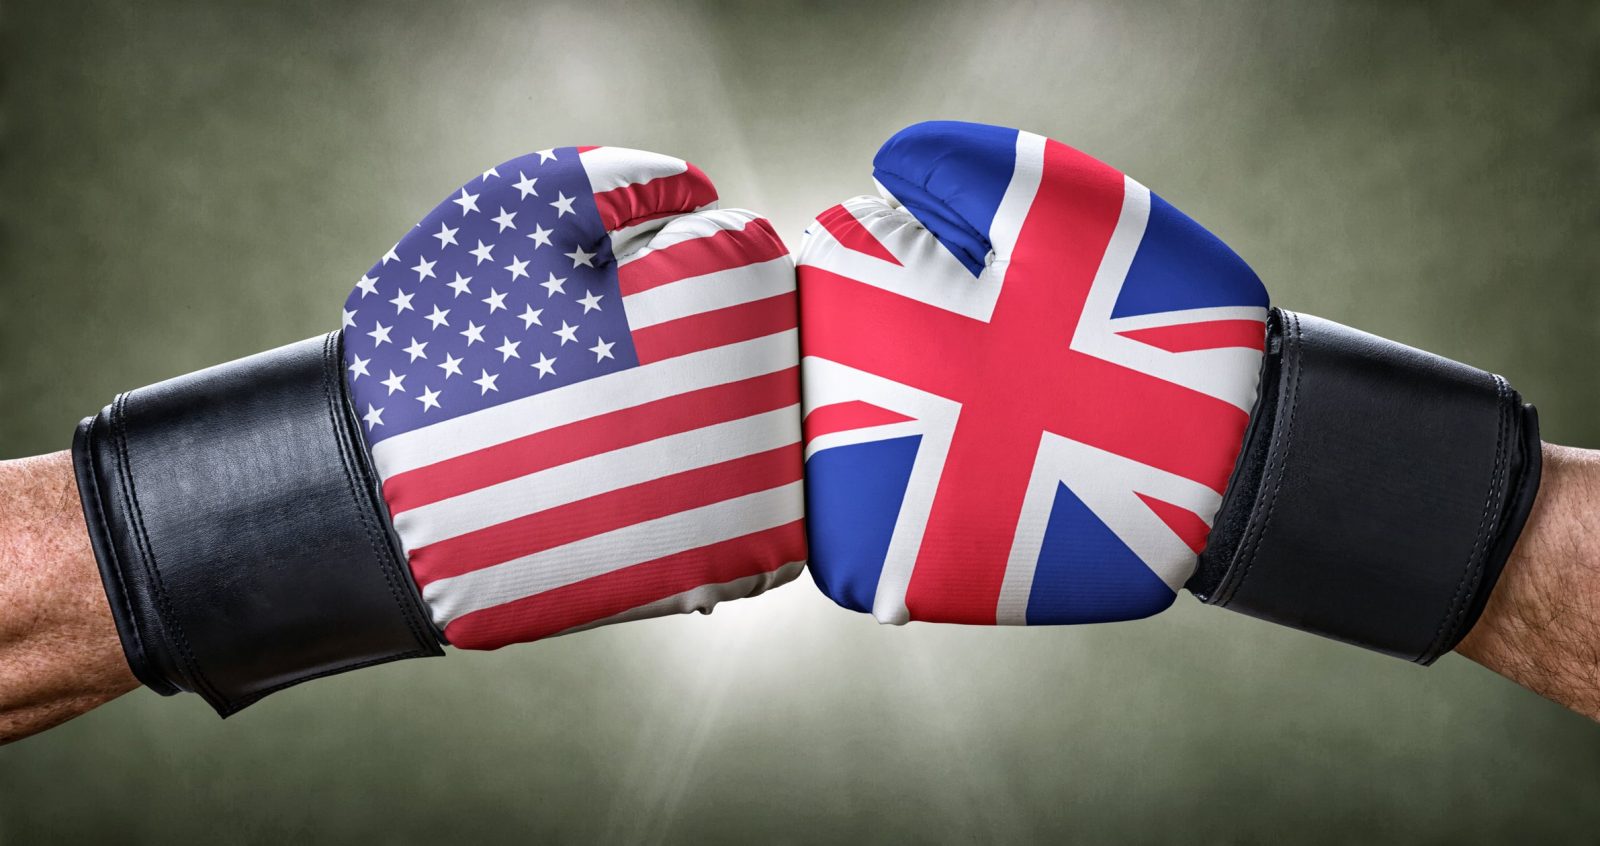 A boxing match between the USA and the UK